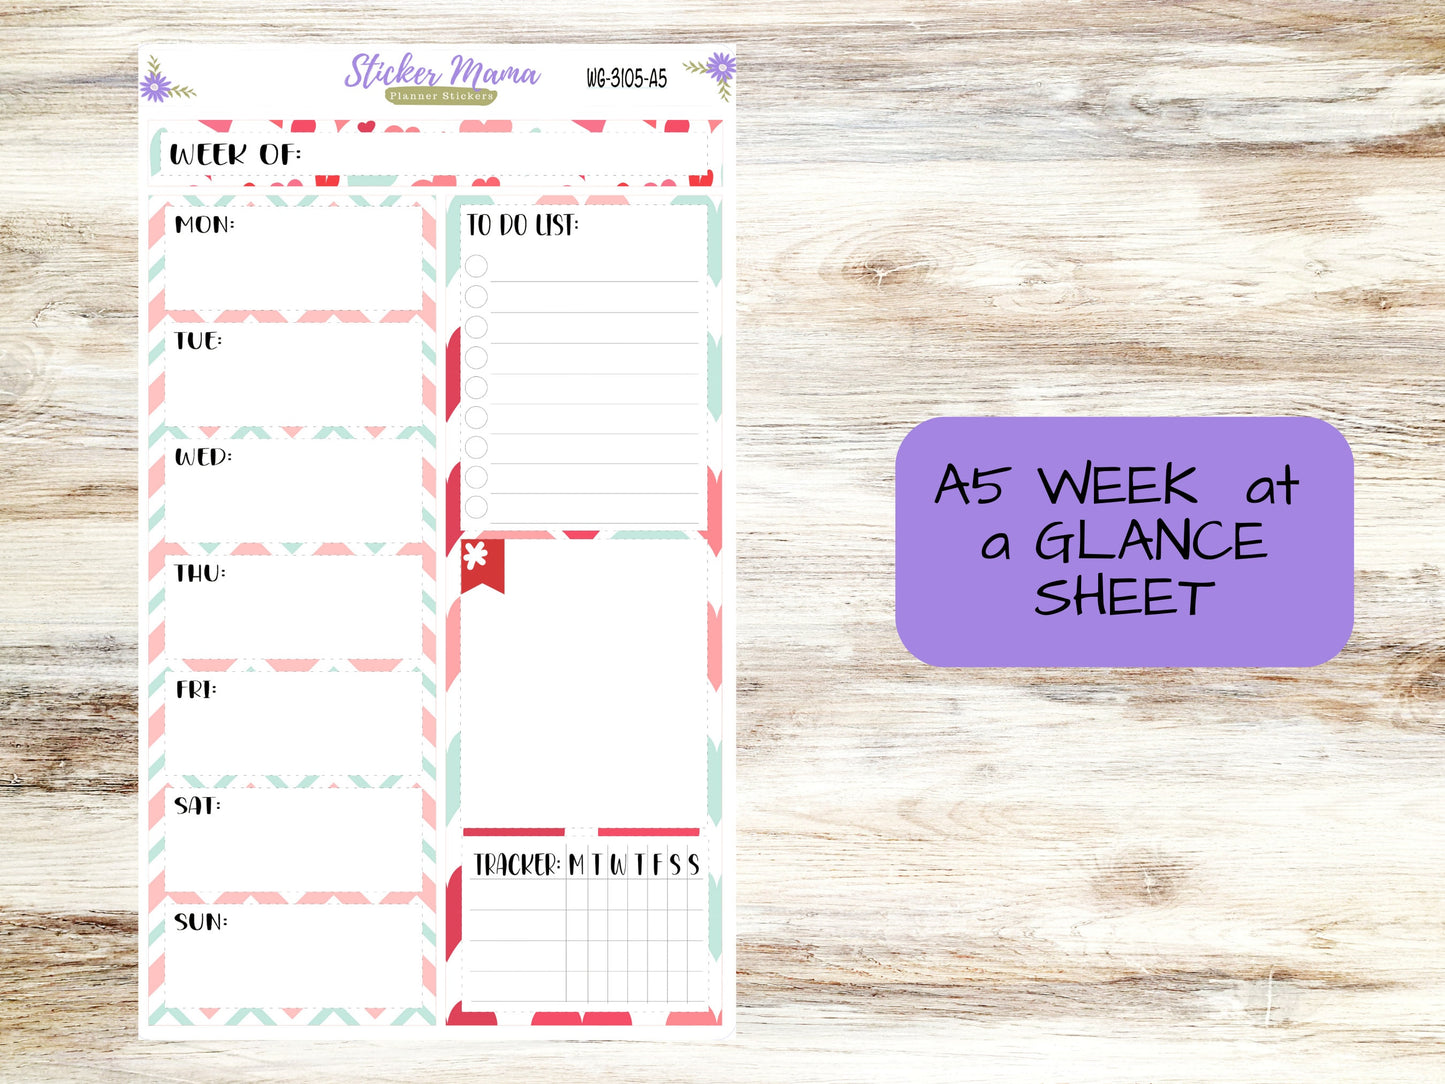 WEEK at a GLANCE-Kit #3105 || Hello, Love! || Week at a Glance - weekly glance 7x9 or a5